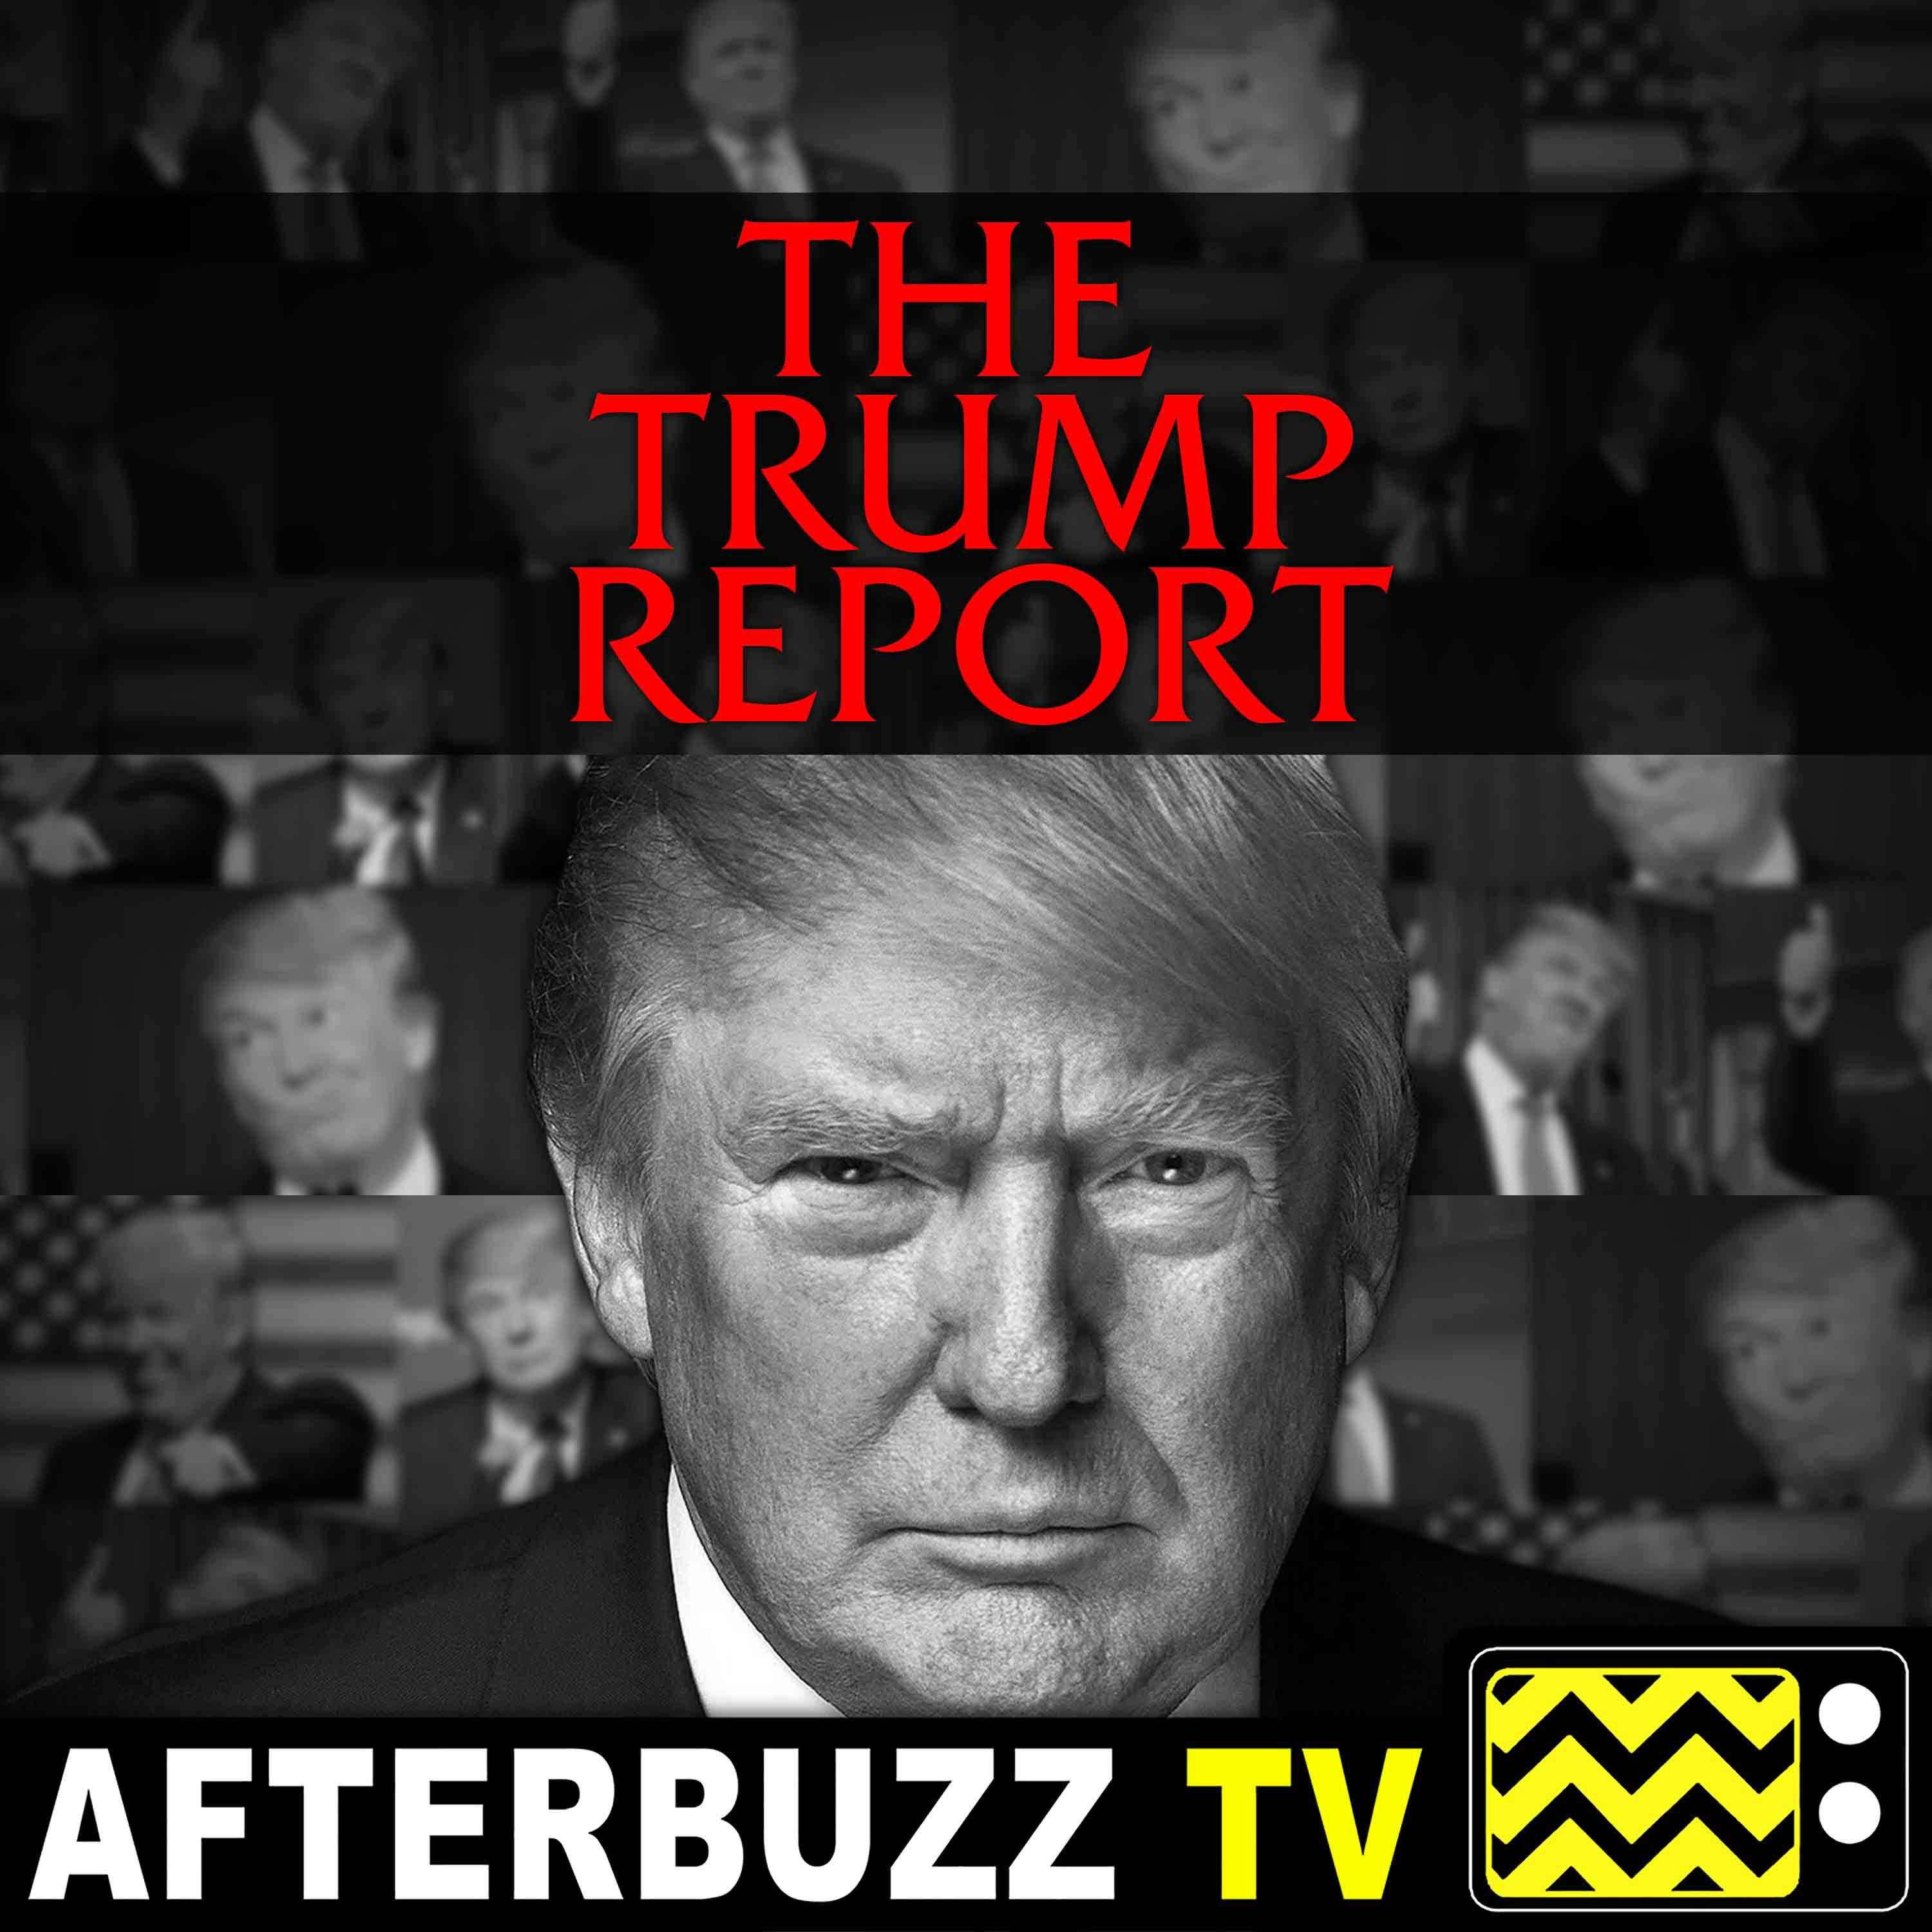 The Trump Report - Let’s Call The Whole Thing Off